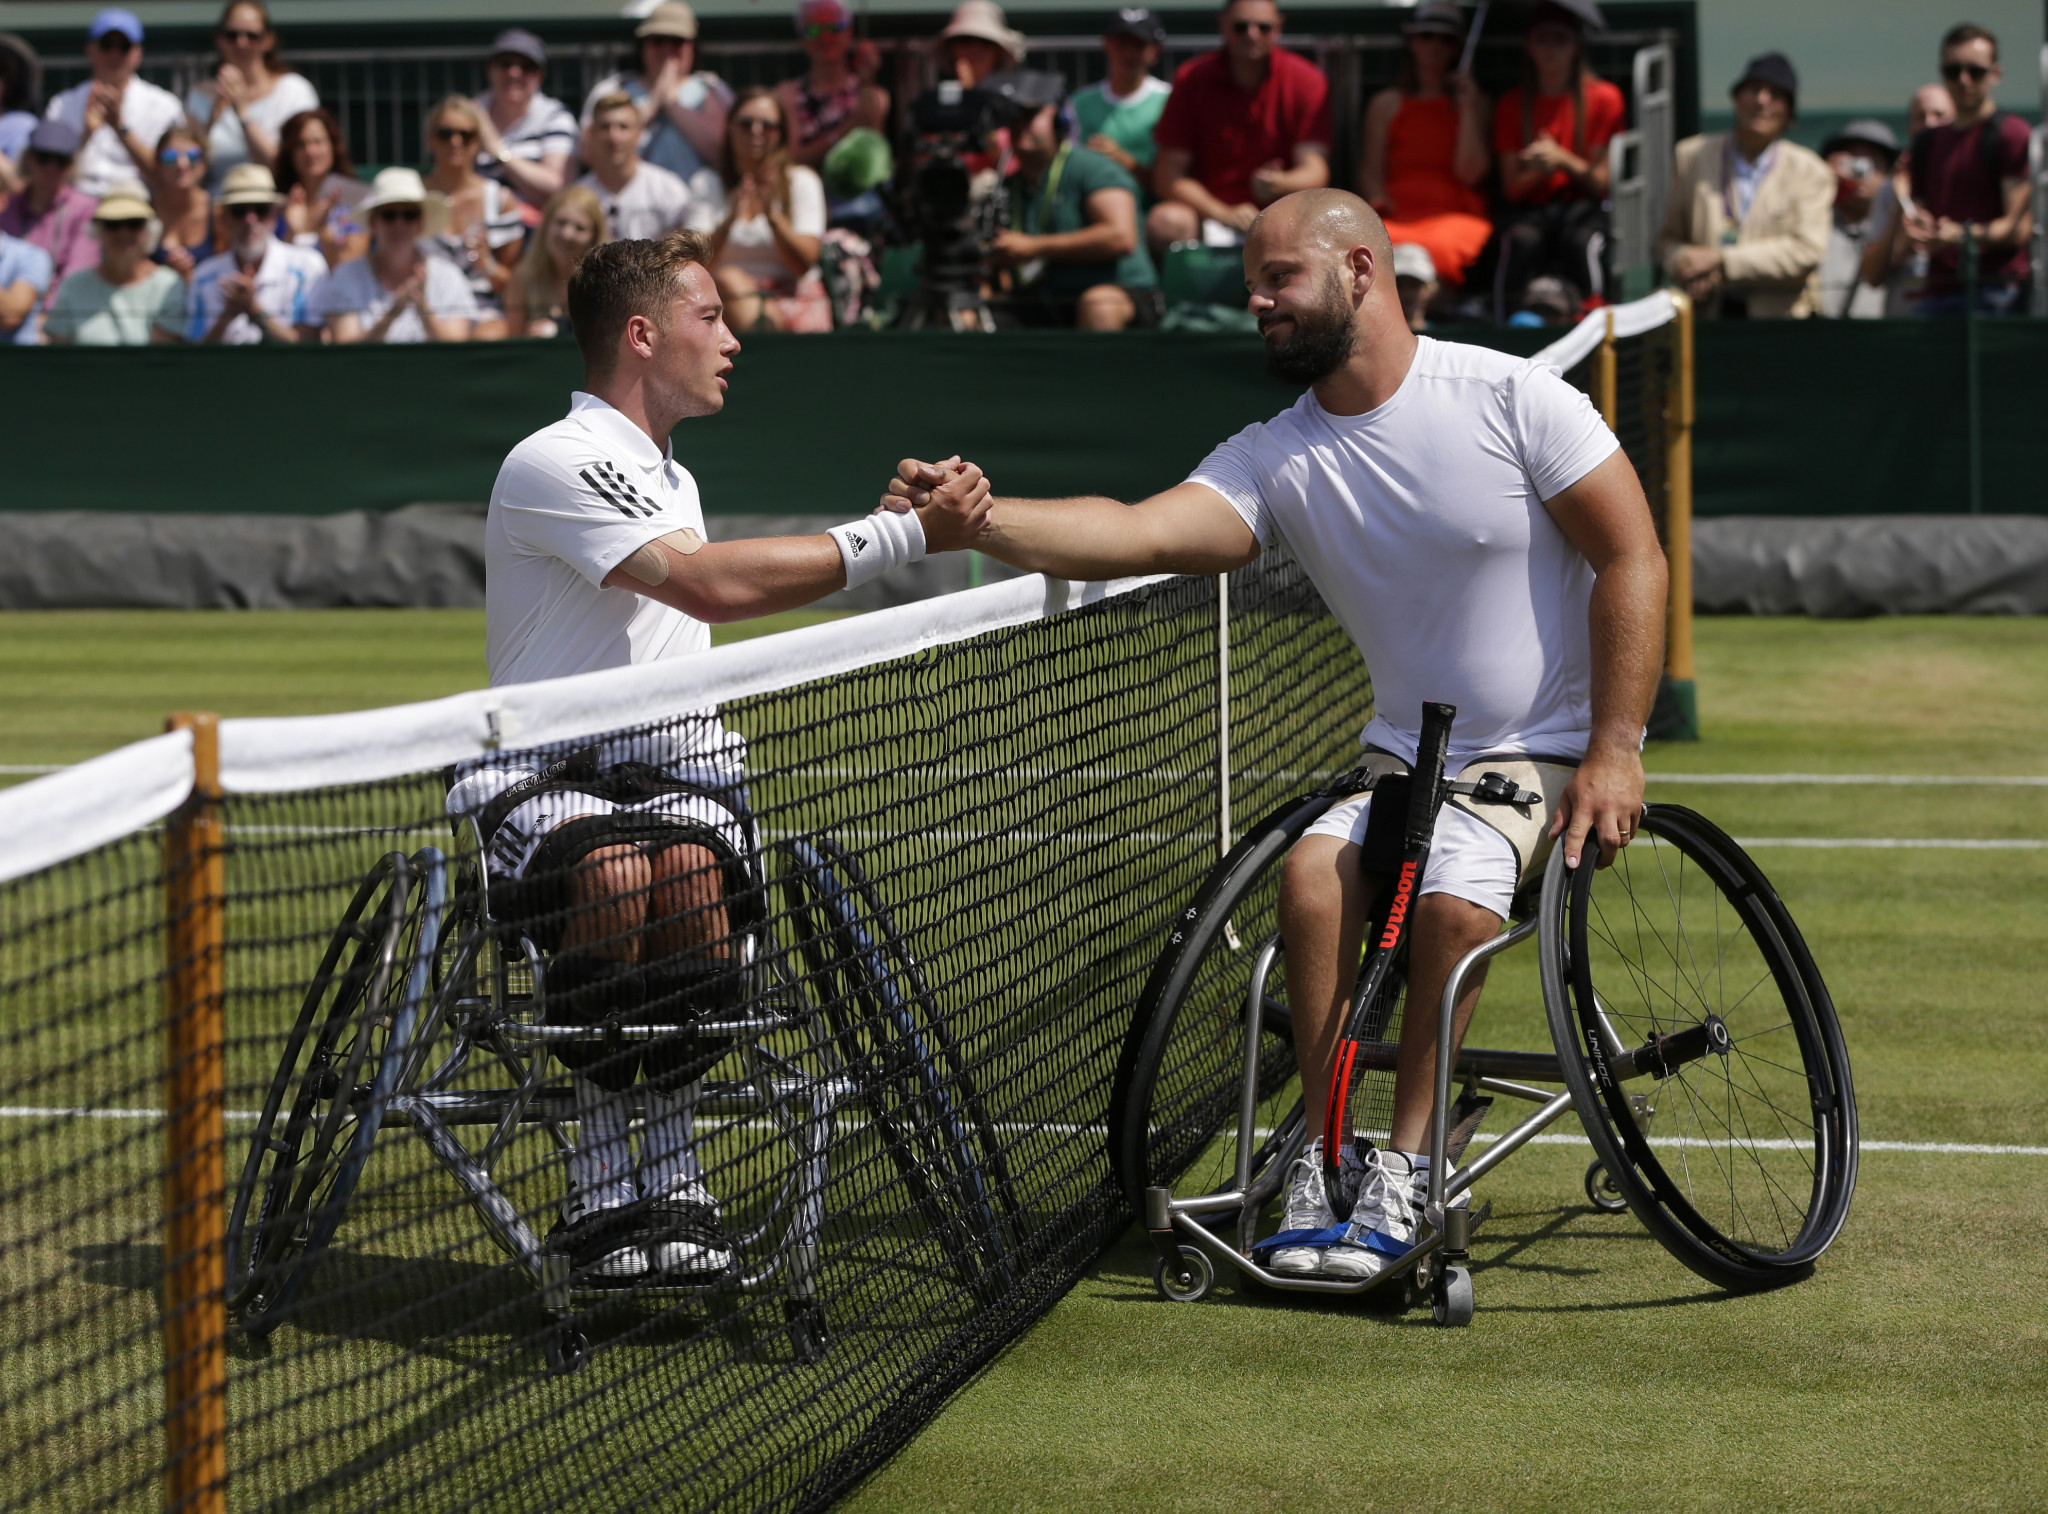 Olsson and Fernandez set up action replay of last year's Wimbledon men's wheelchair singles final